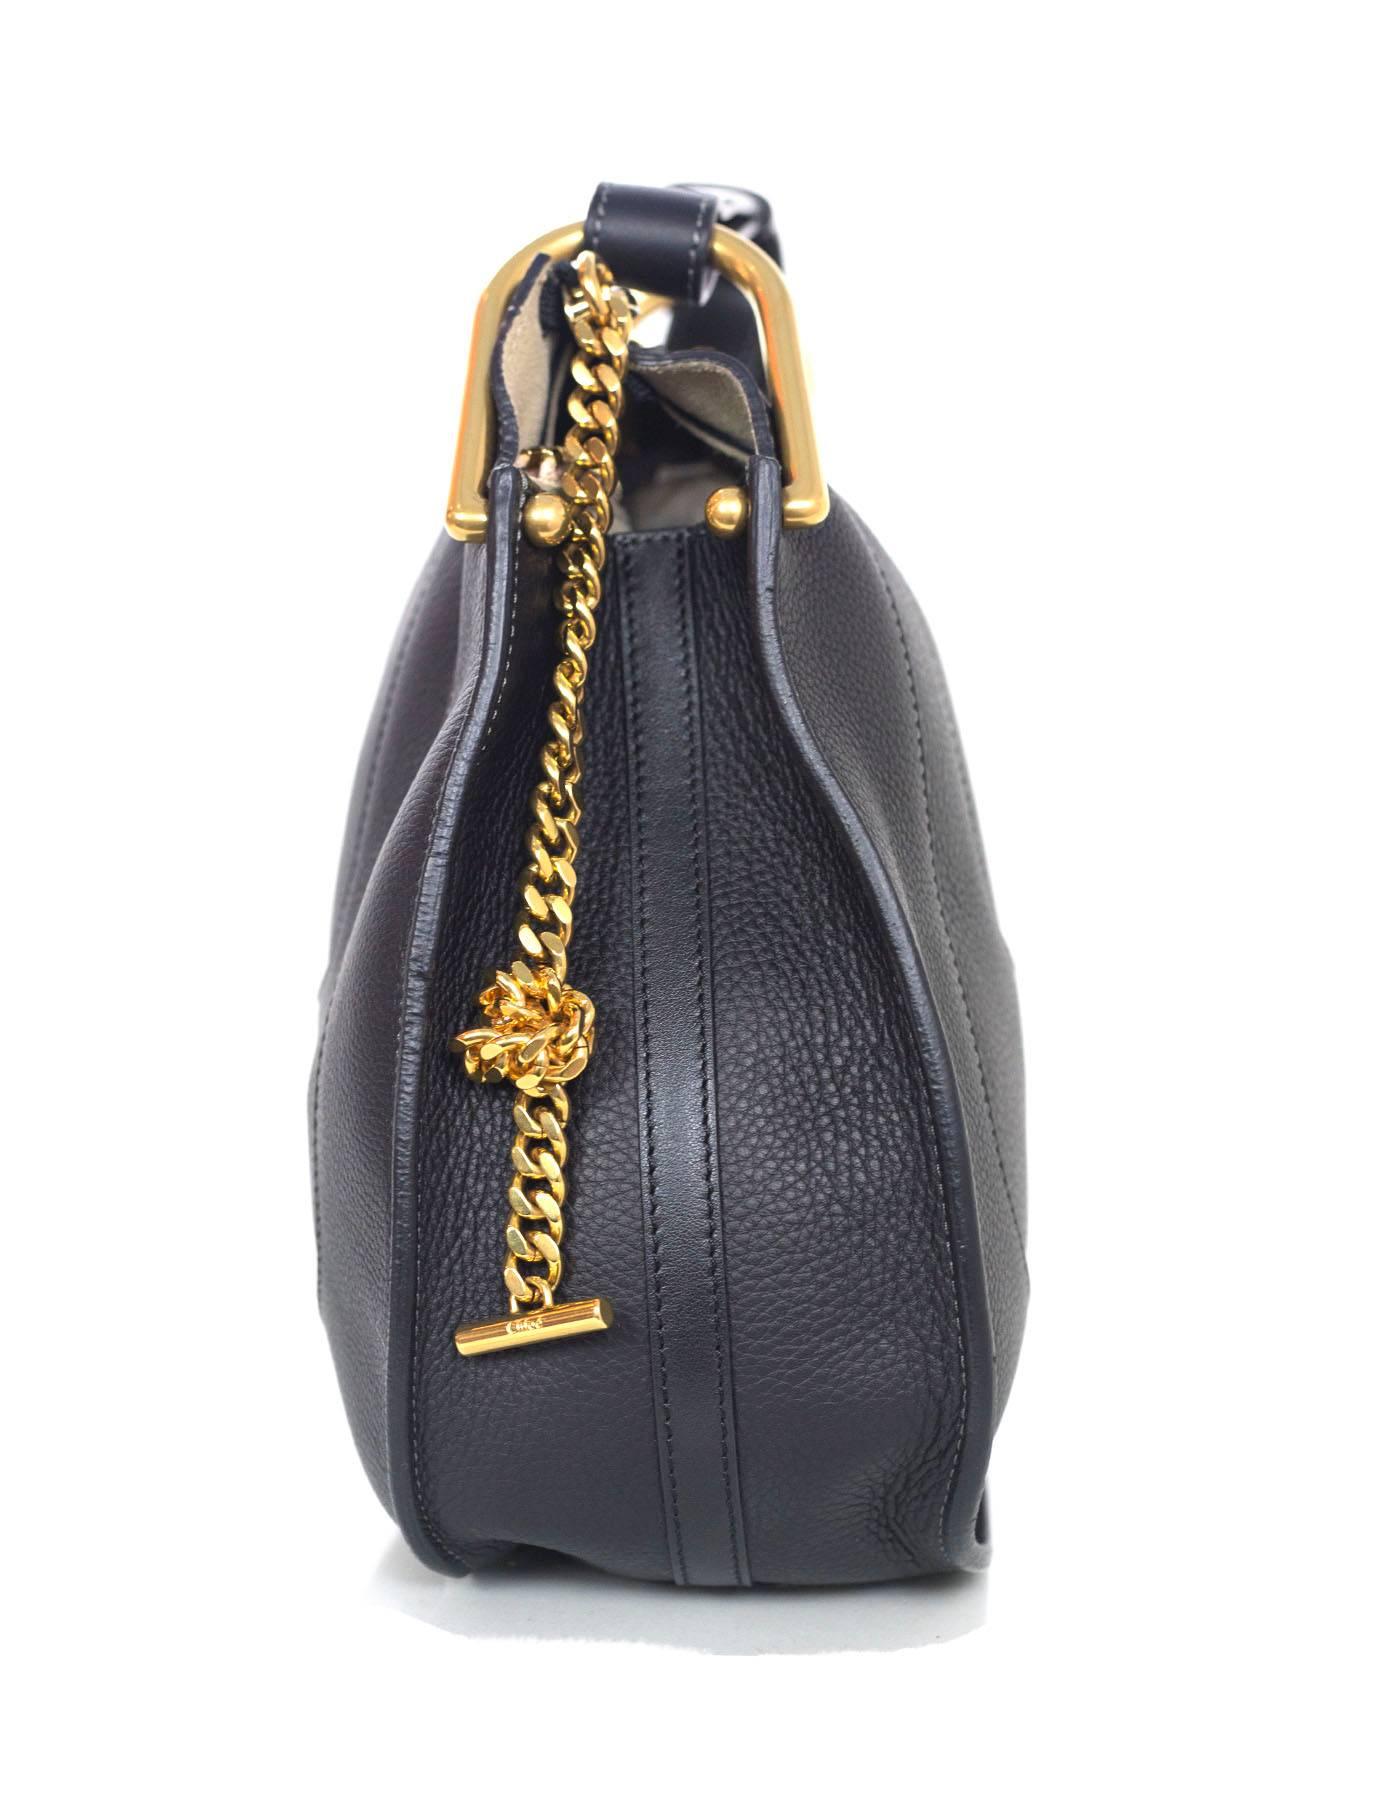 100% Authentic Chloe Black Leather "Hayley" Shoulder Bag. Features classic saddle shape with decorative seaming, textured leather, zip top closure with chain pull, gold hardware and studs. Comes with dust bag, care card, authenticity card,